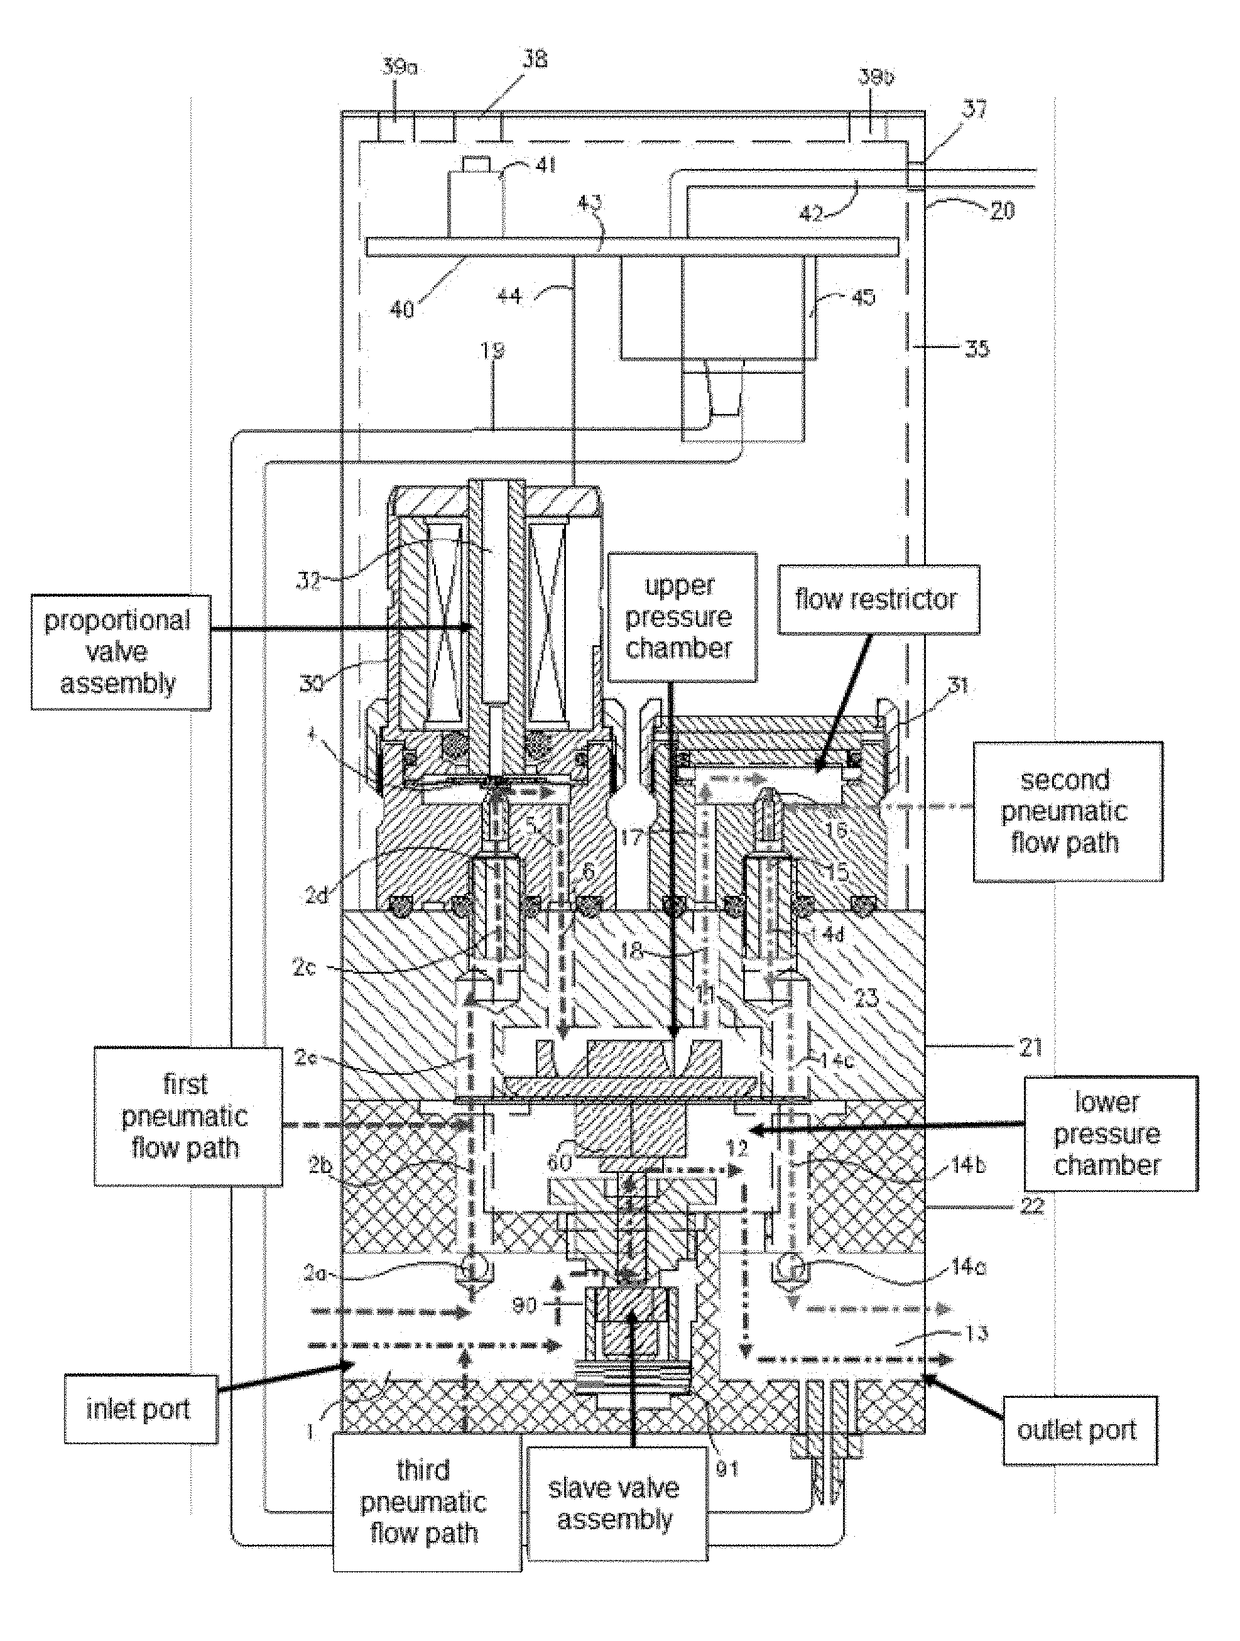 Pilot operated parallel valve